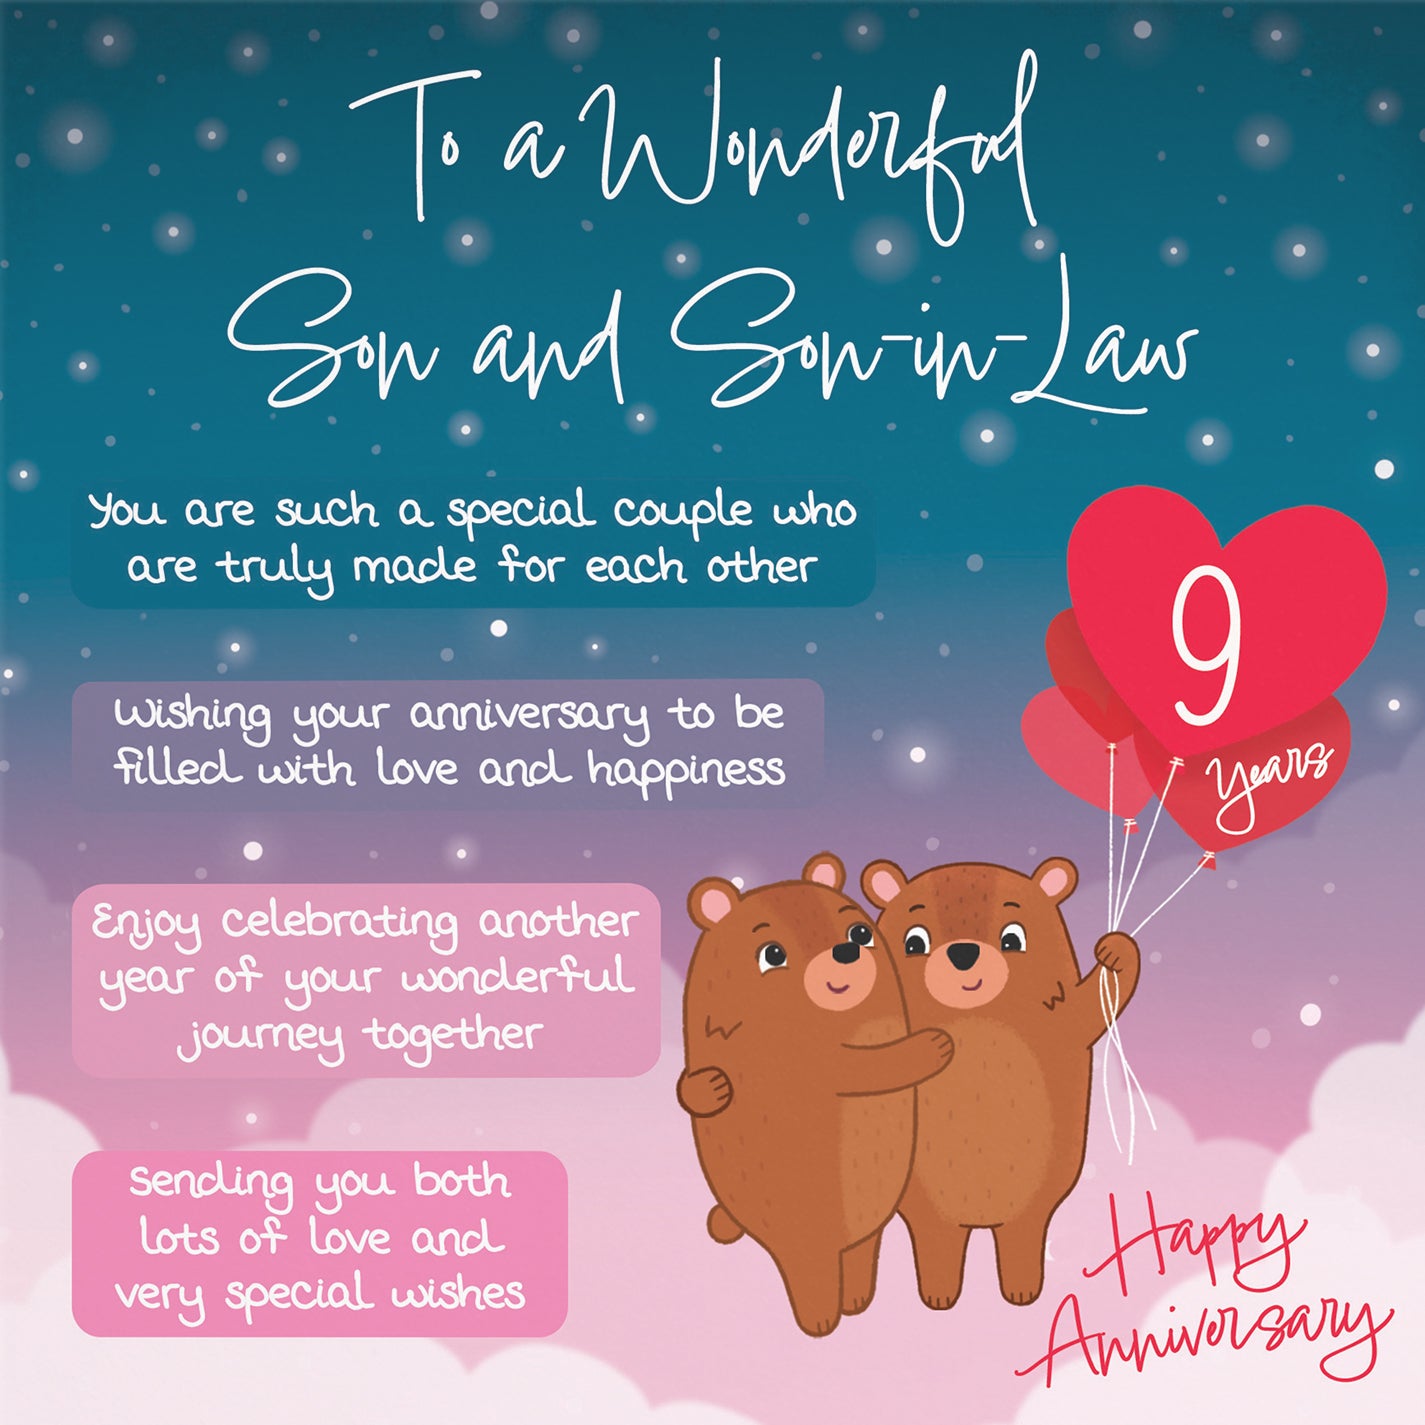 Son And Son In Law 9th Anniversary Card Starry Night Cute Bears